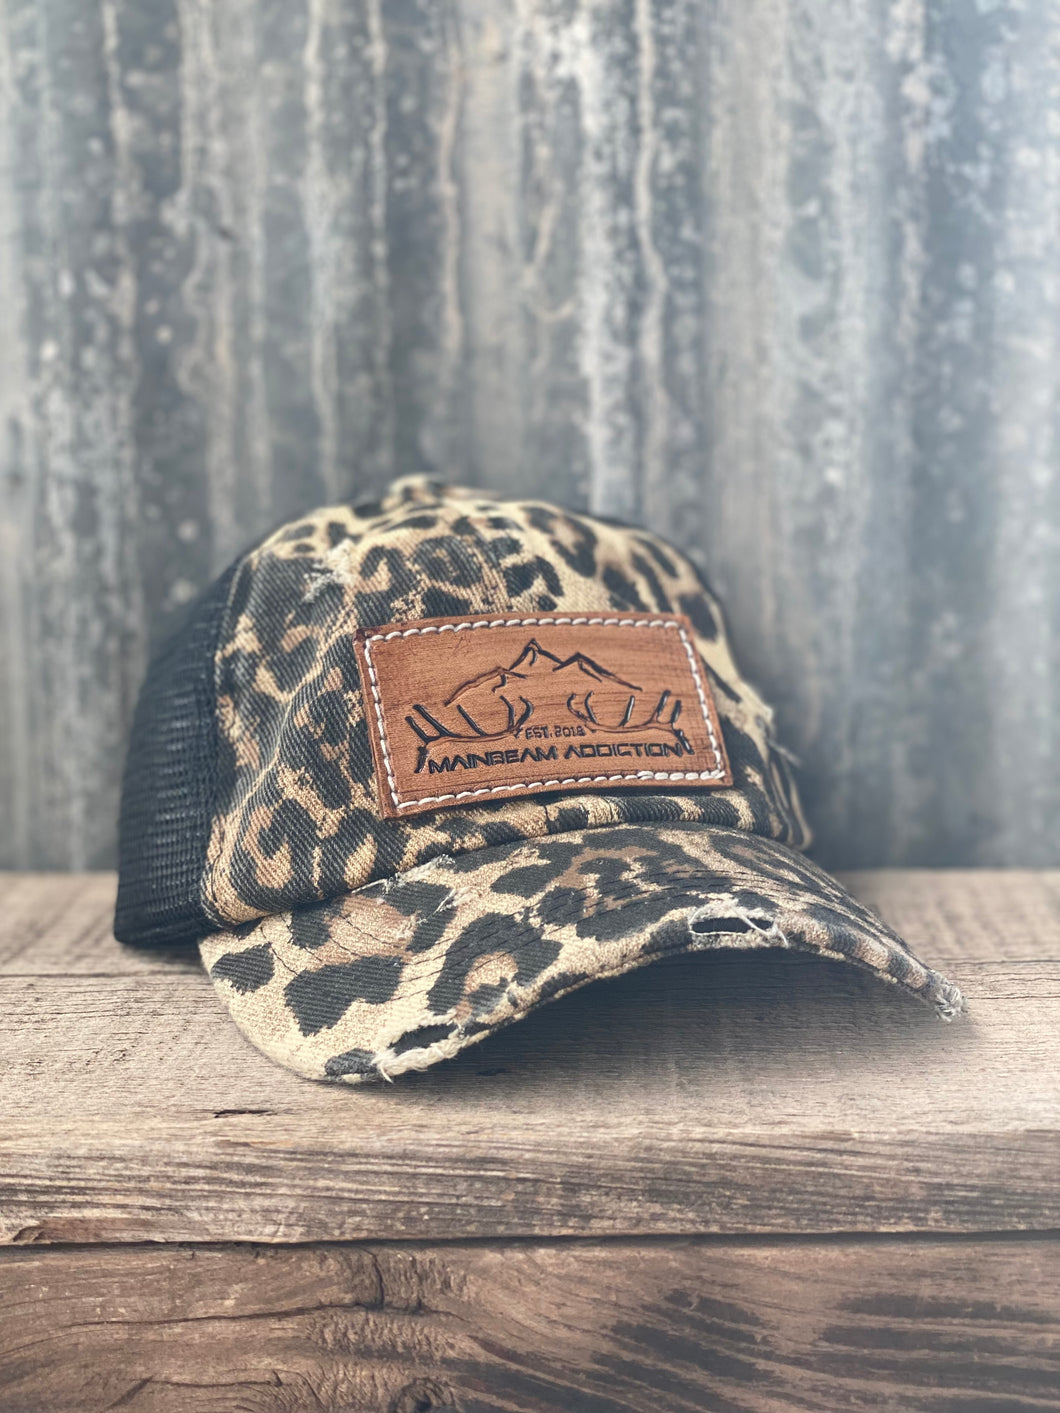 MBA Shed Womens Ponytail Hat - Leopard